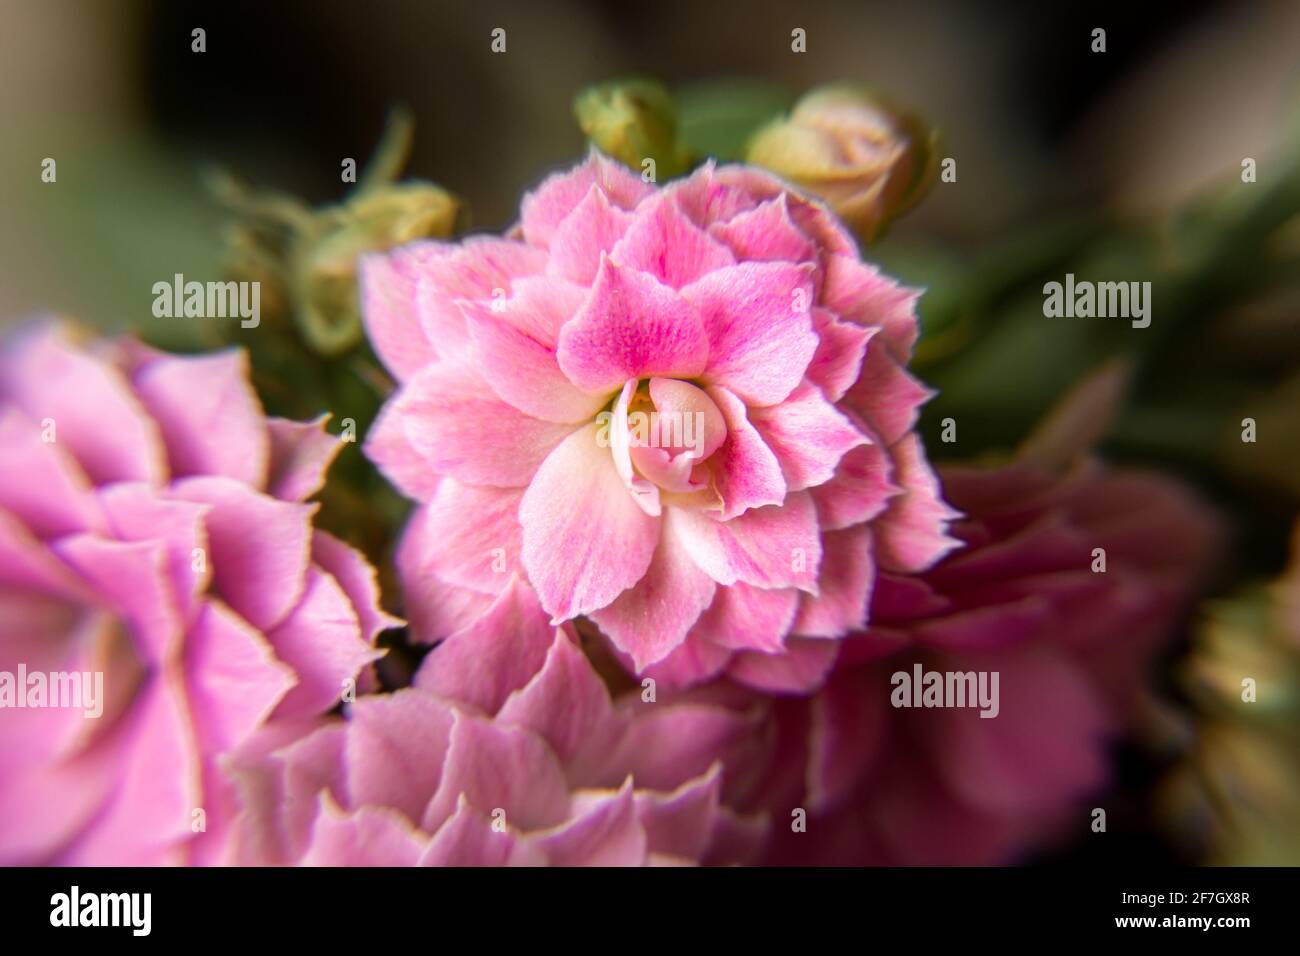 indoor plant flower Kalanchoe Blossfeld pink Close-up shot with selective focus Stock Photo